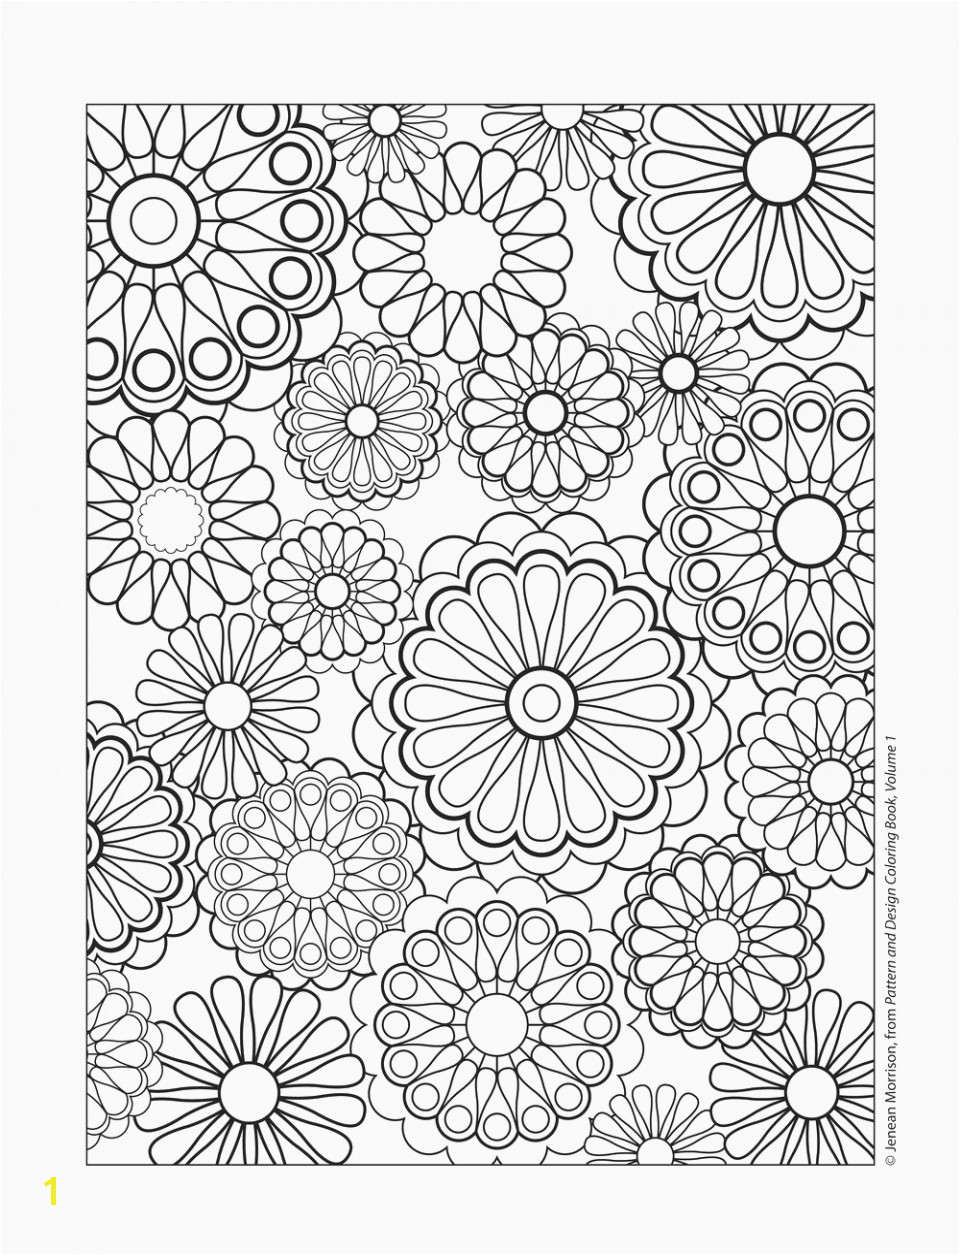 Adult Coloring Book Pages Coloring Pages Patterns Best Coloring Book 0d Archives Se